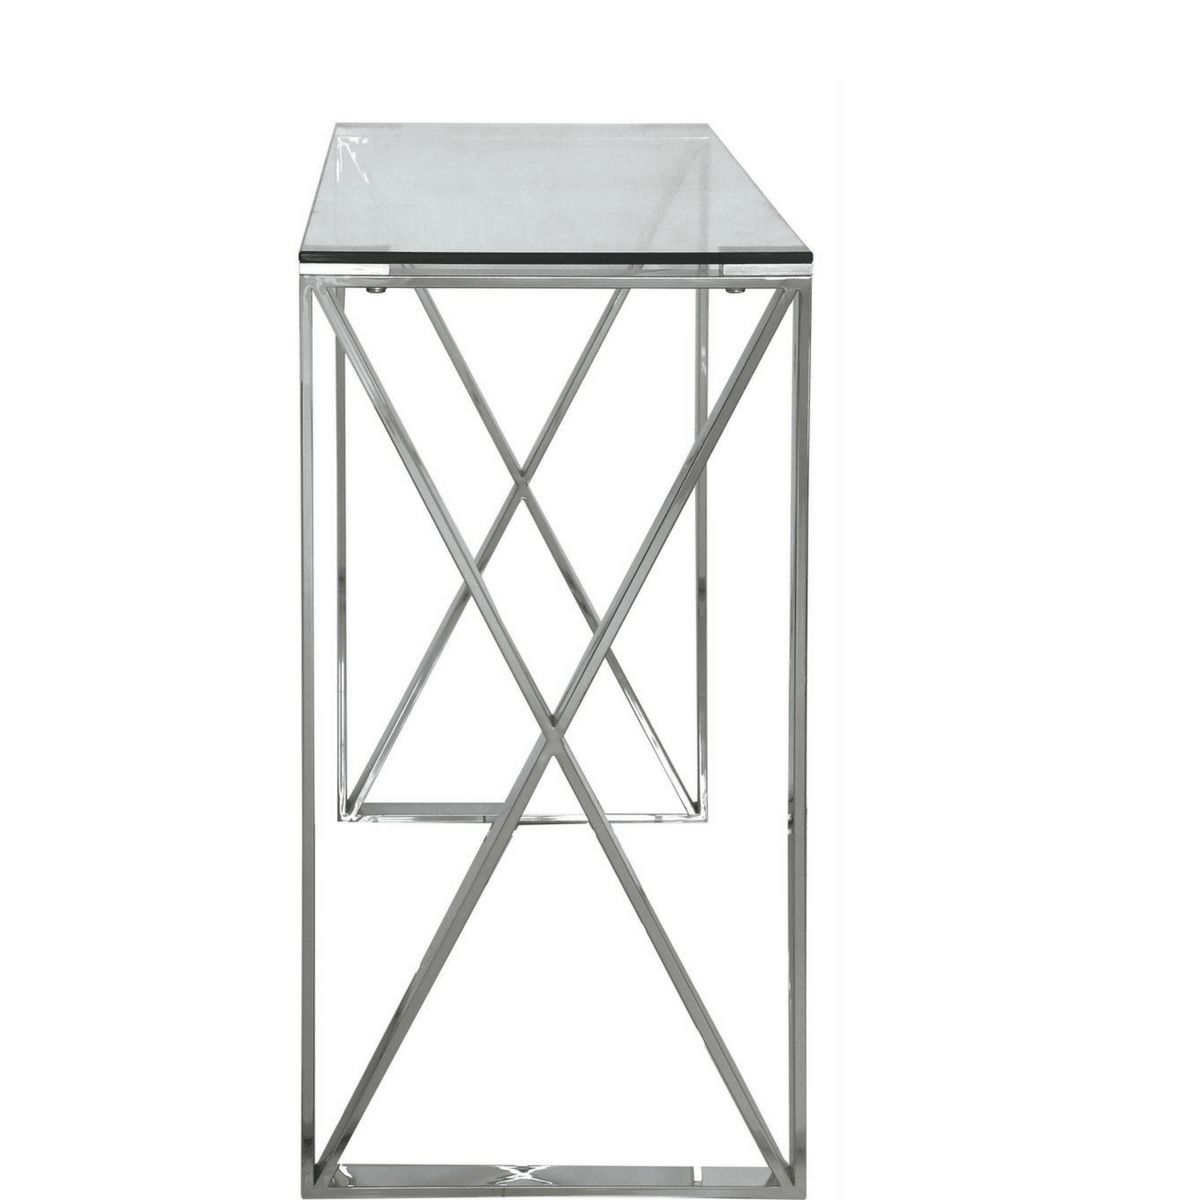 Zenith Stainless Steel Console Table – Corcorans Furniture & Carpets With Regard To Silver Stainless Steel Console Tables (View 14 of 20)